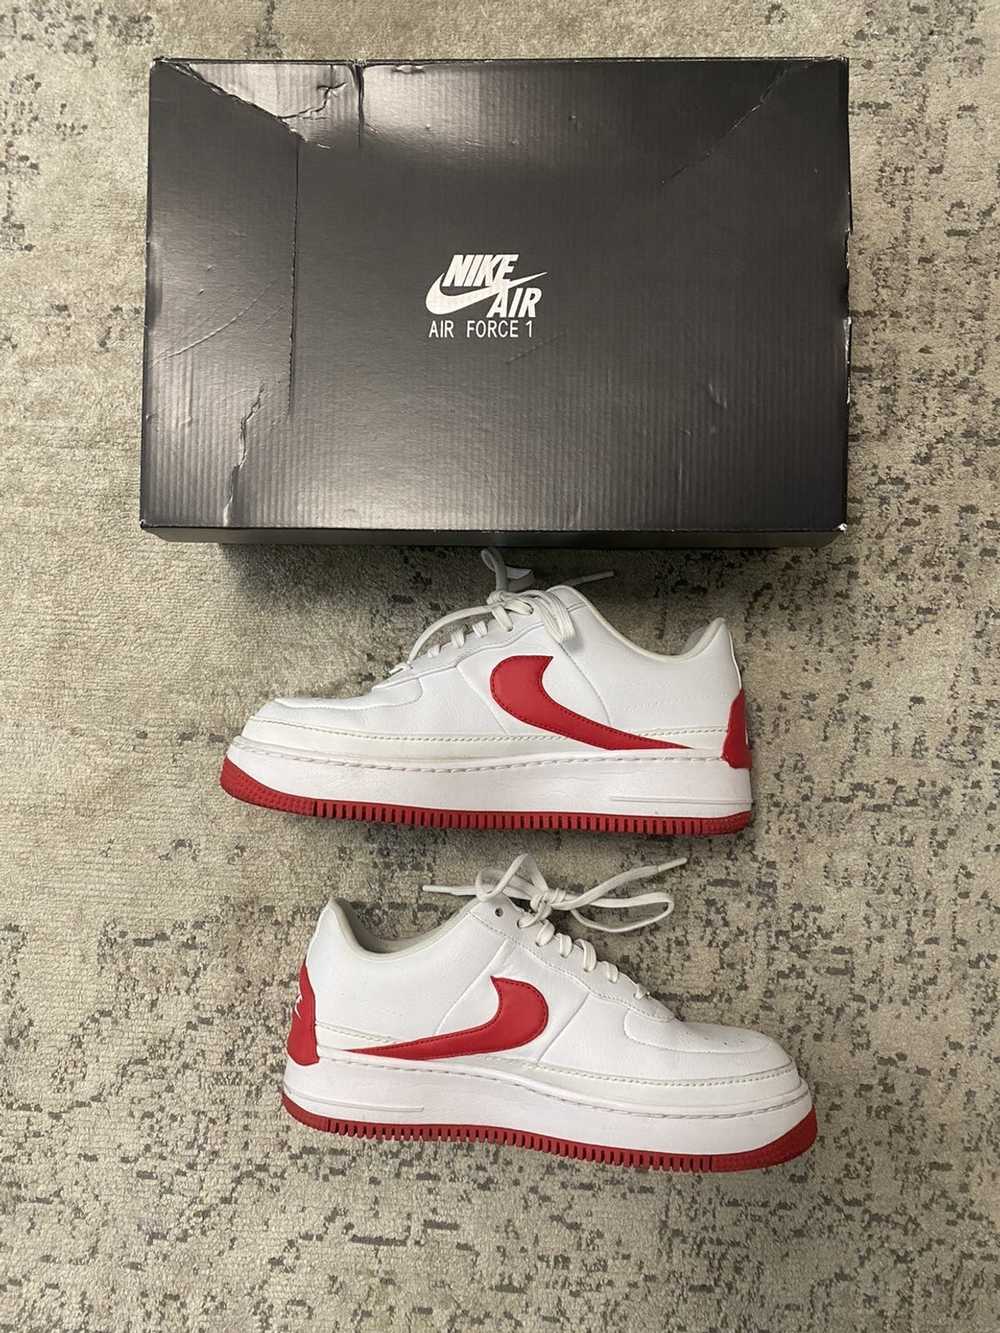 Nike Air Force One Jester Red (Womens 11) - image 2